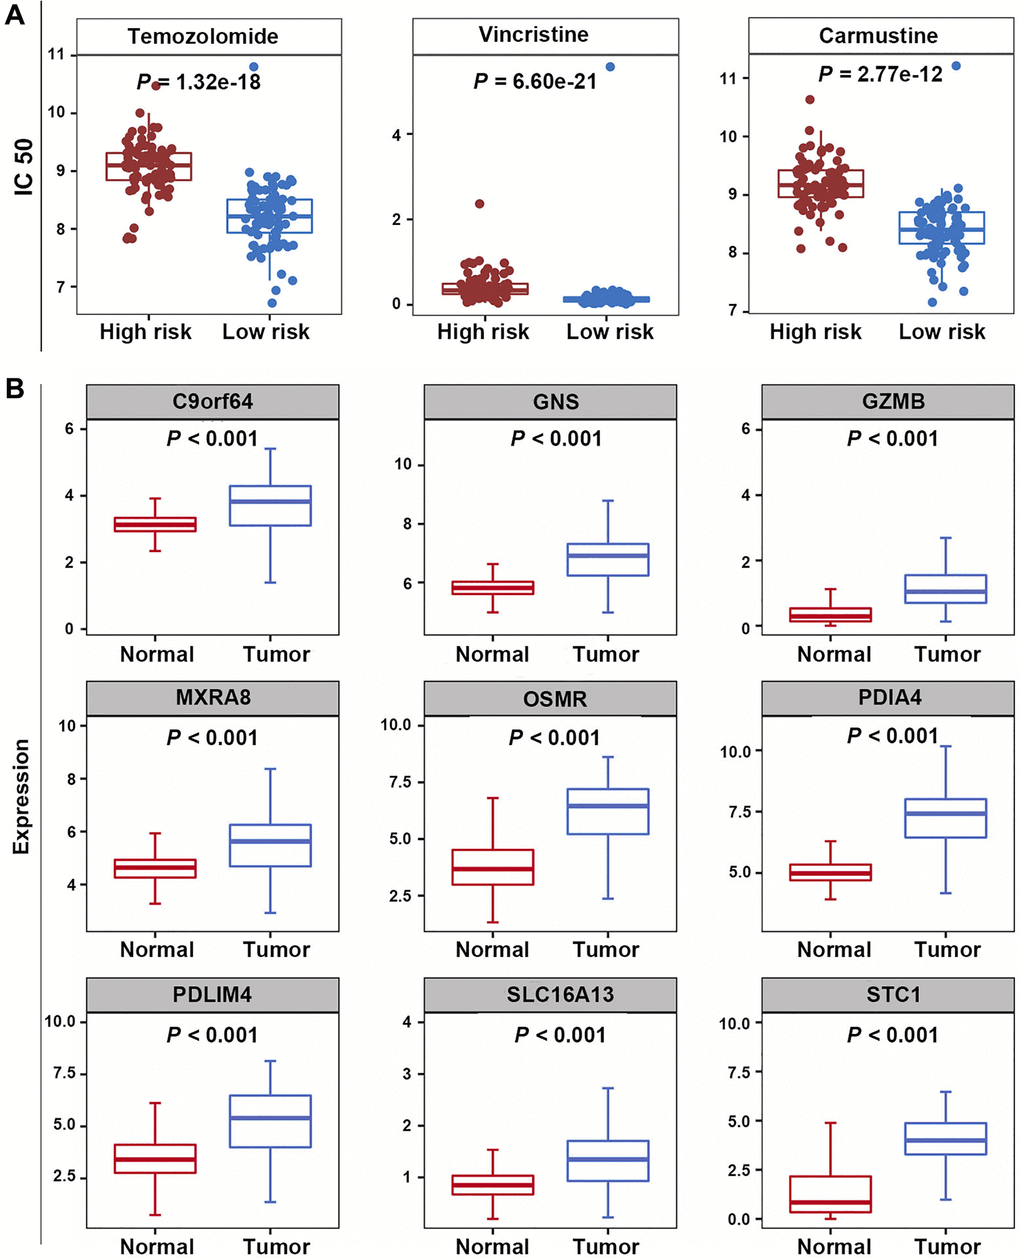 Correlation analysis of prognostic model and chemotherapeutic sensitivity, as well as expression analysis of PRGs. (A) The IC50 values for temozolomide, carmustine, and vincristine in the high-risk and low-risk groups. (B) The expression levels of nine PRGs.